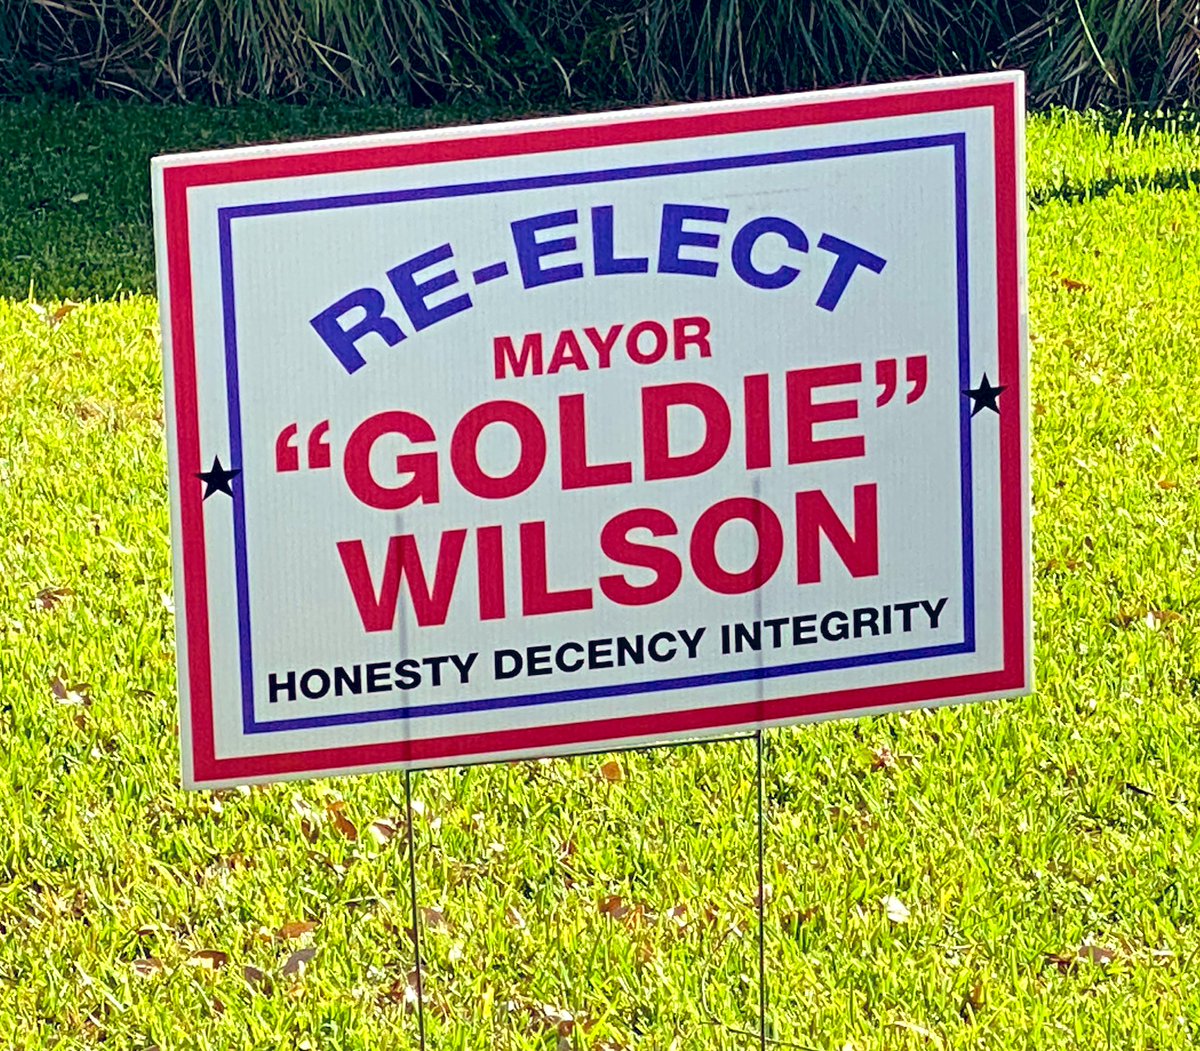 For the win

#election #hillvalley #mayorgoldiewilson #ilikethesoundofthat